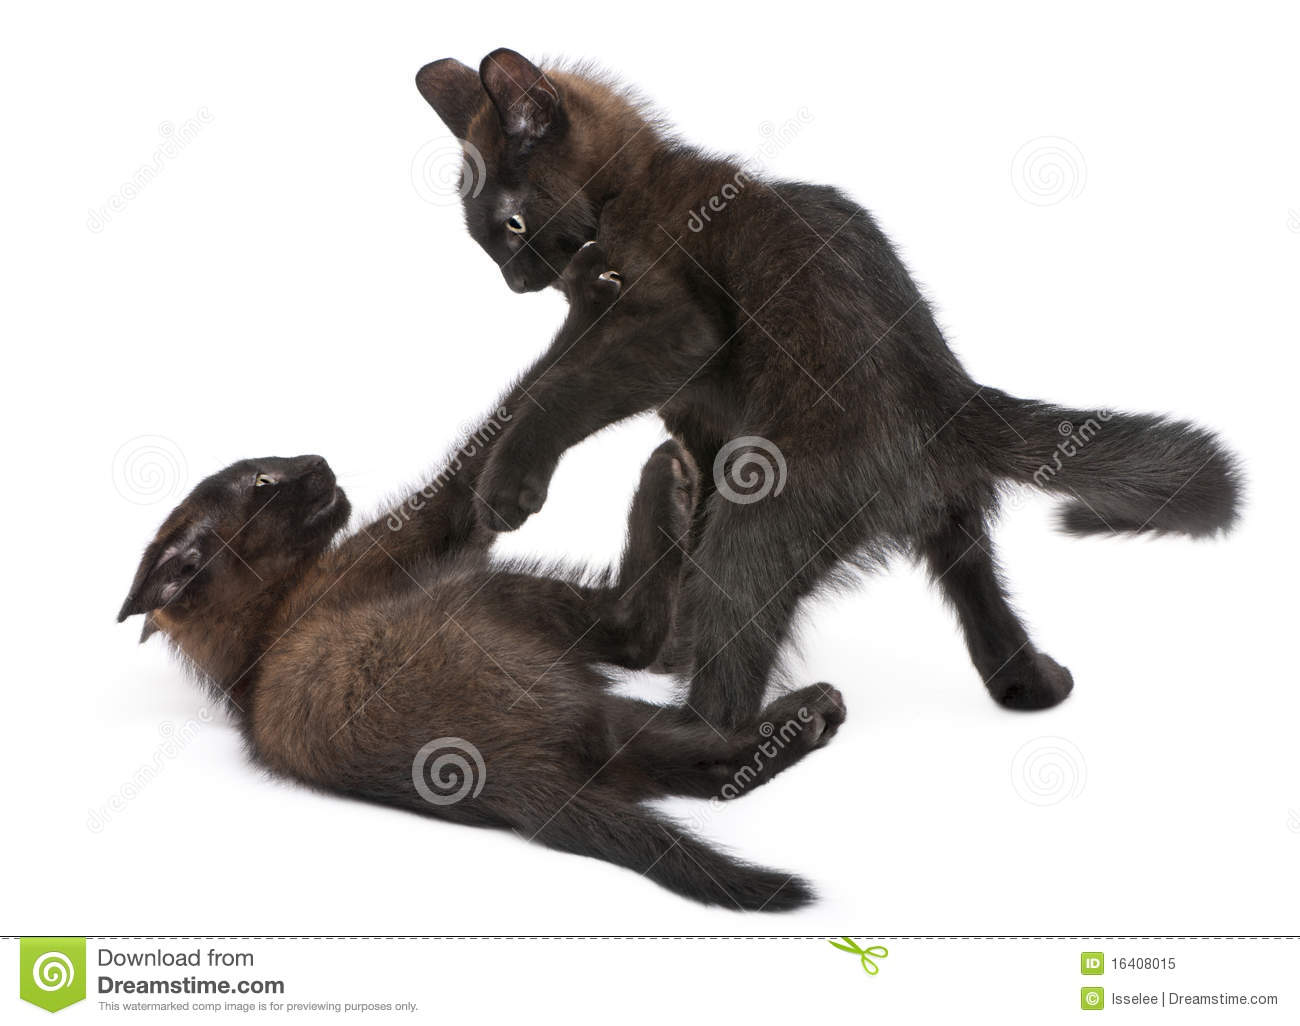 Two Black Kittens Playing Together In Front Of White Background